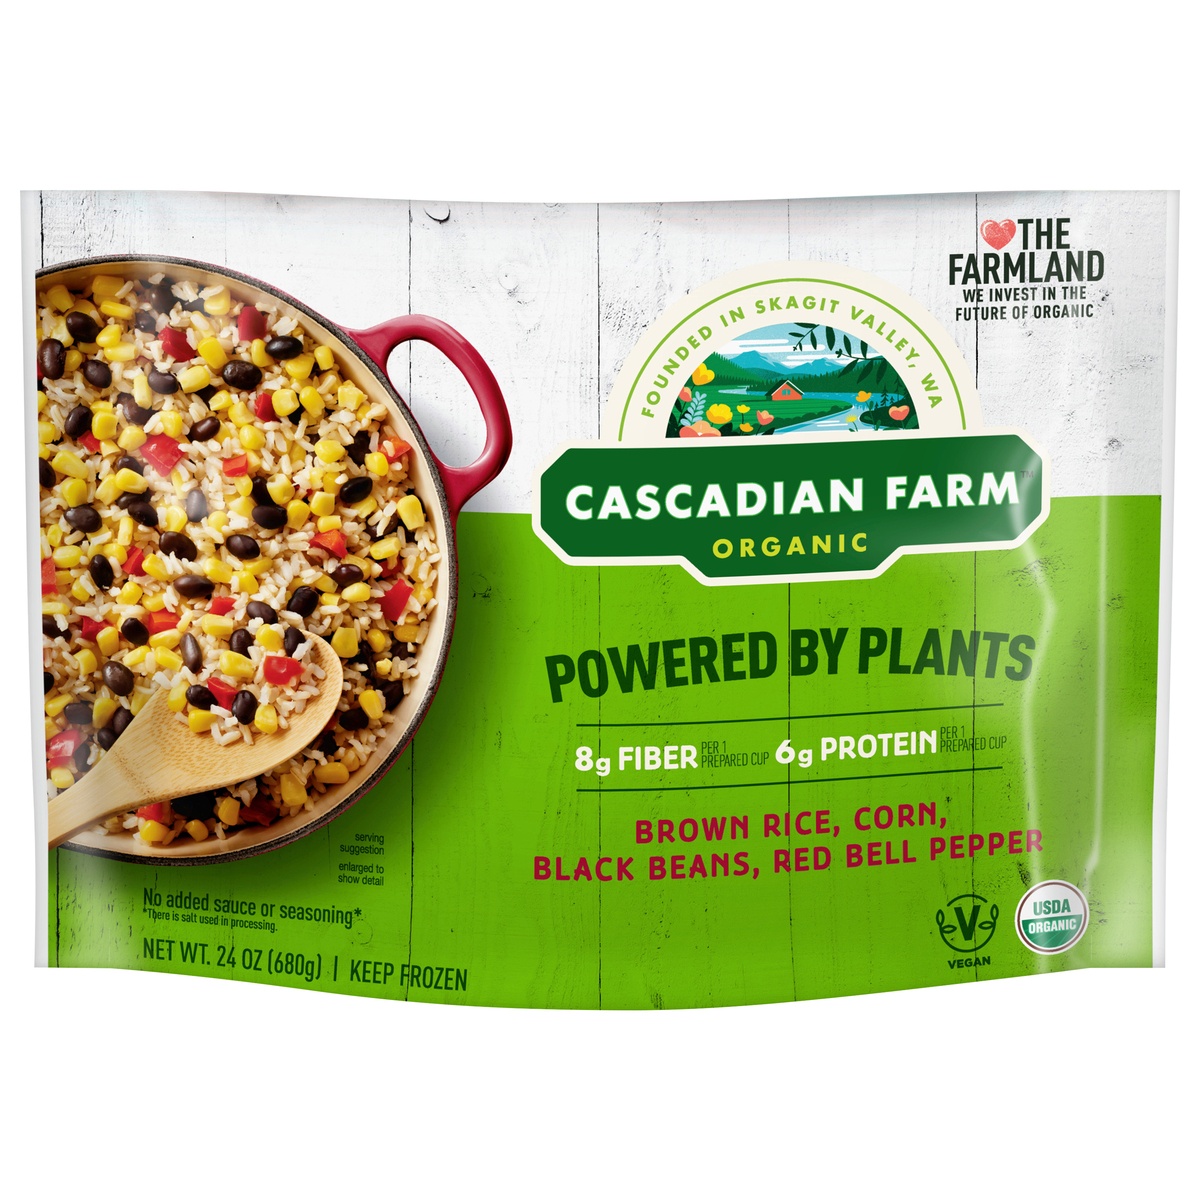 slide 1 of 1, Cascadian Farm Organic Brown Rice, Corn, Black Beans and Red Bell Peppers, 24 oz, 24 oz